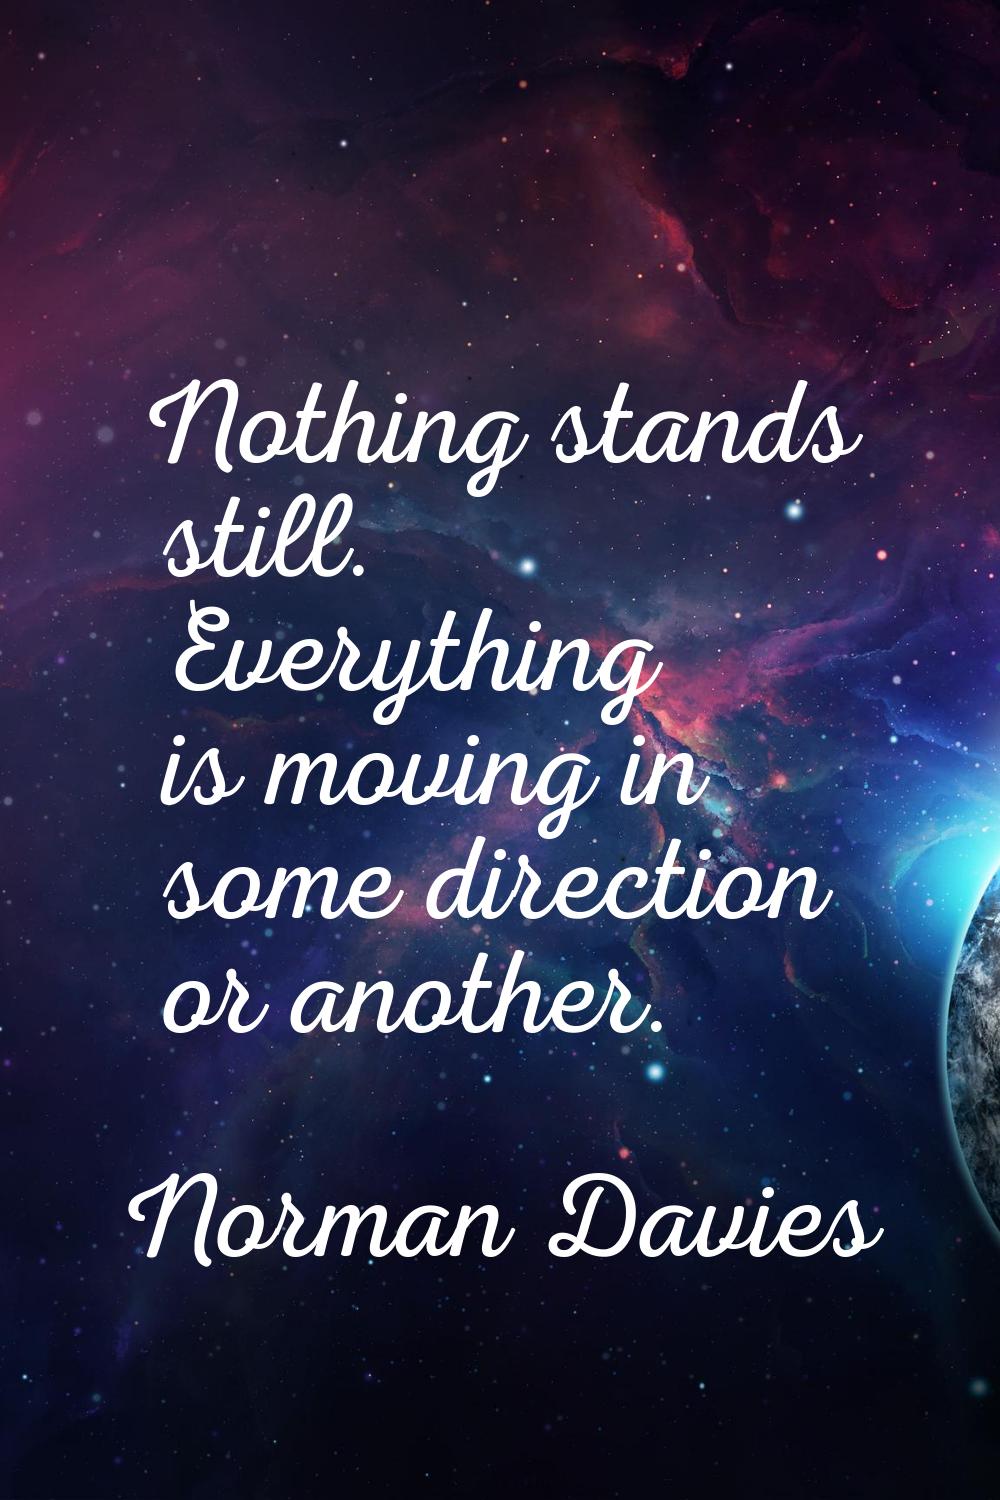 Nothing stands still. Everything is moving in some direction or another.